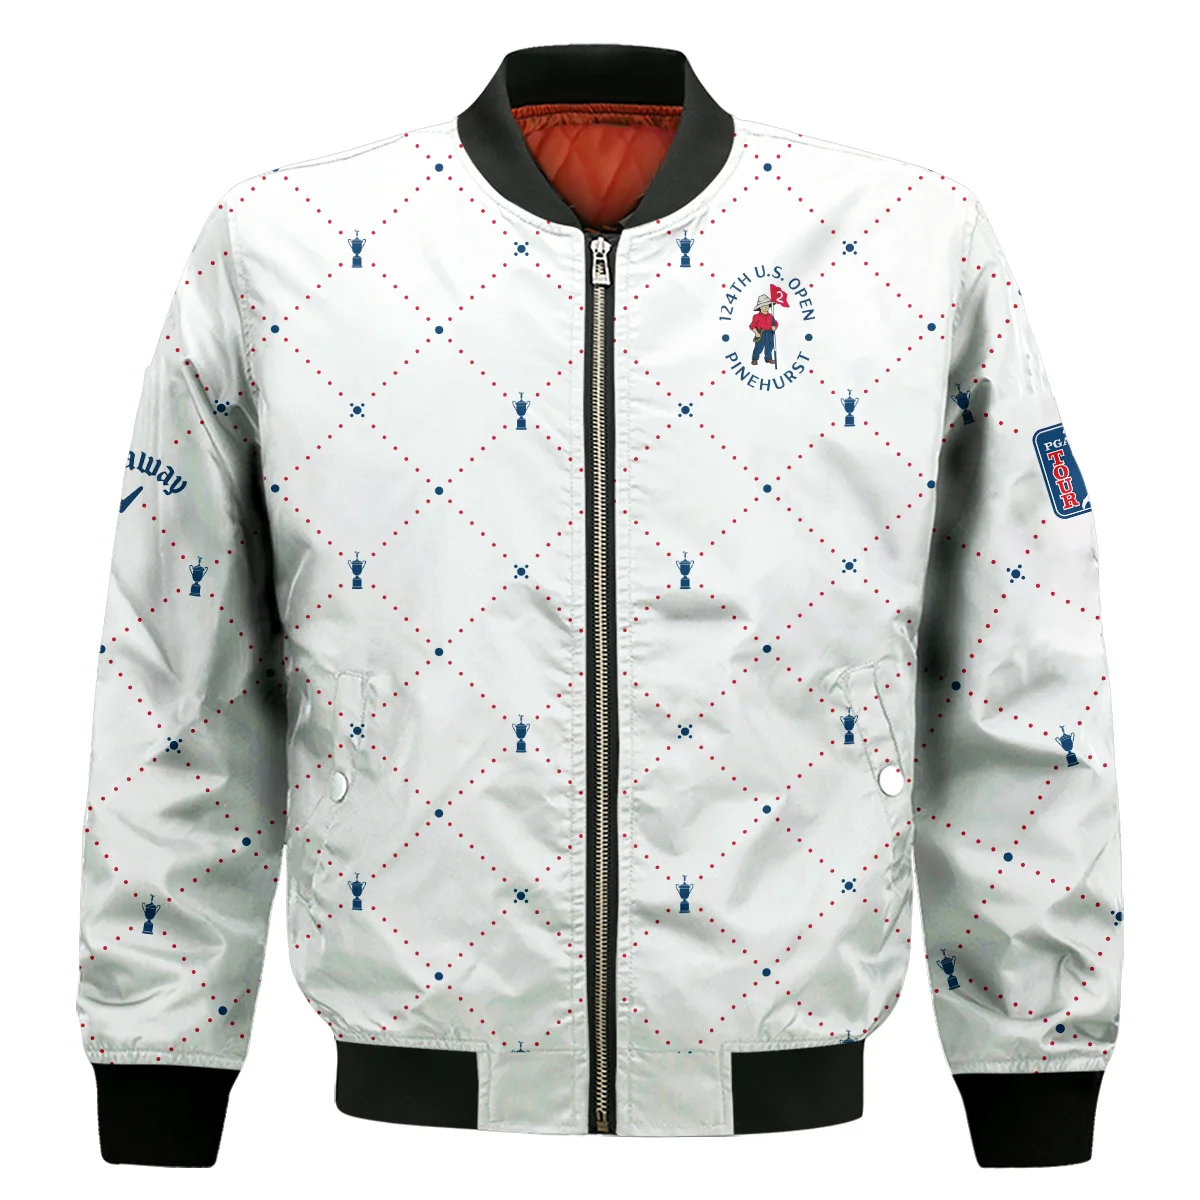 Argyle Pattern With Cup 124th U.S. Open Pinehurst Callaway Bomber Jacket Style Classic Bomber Jacket